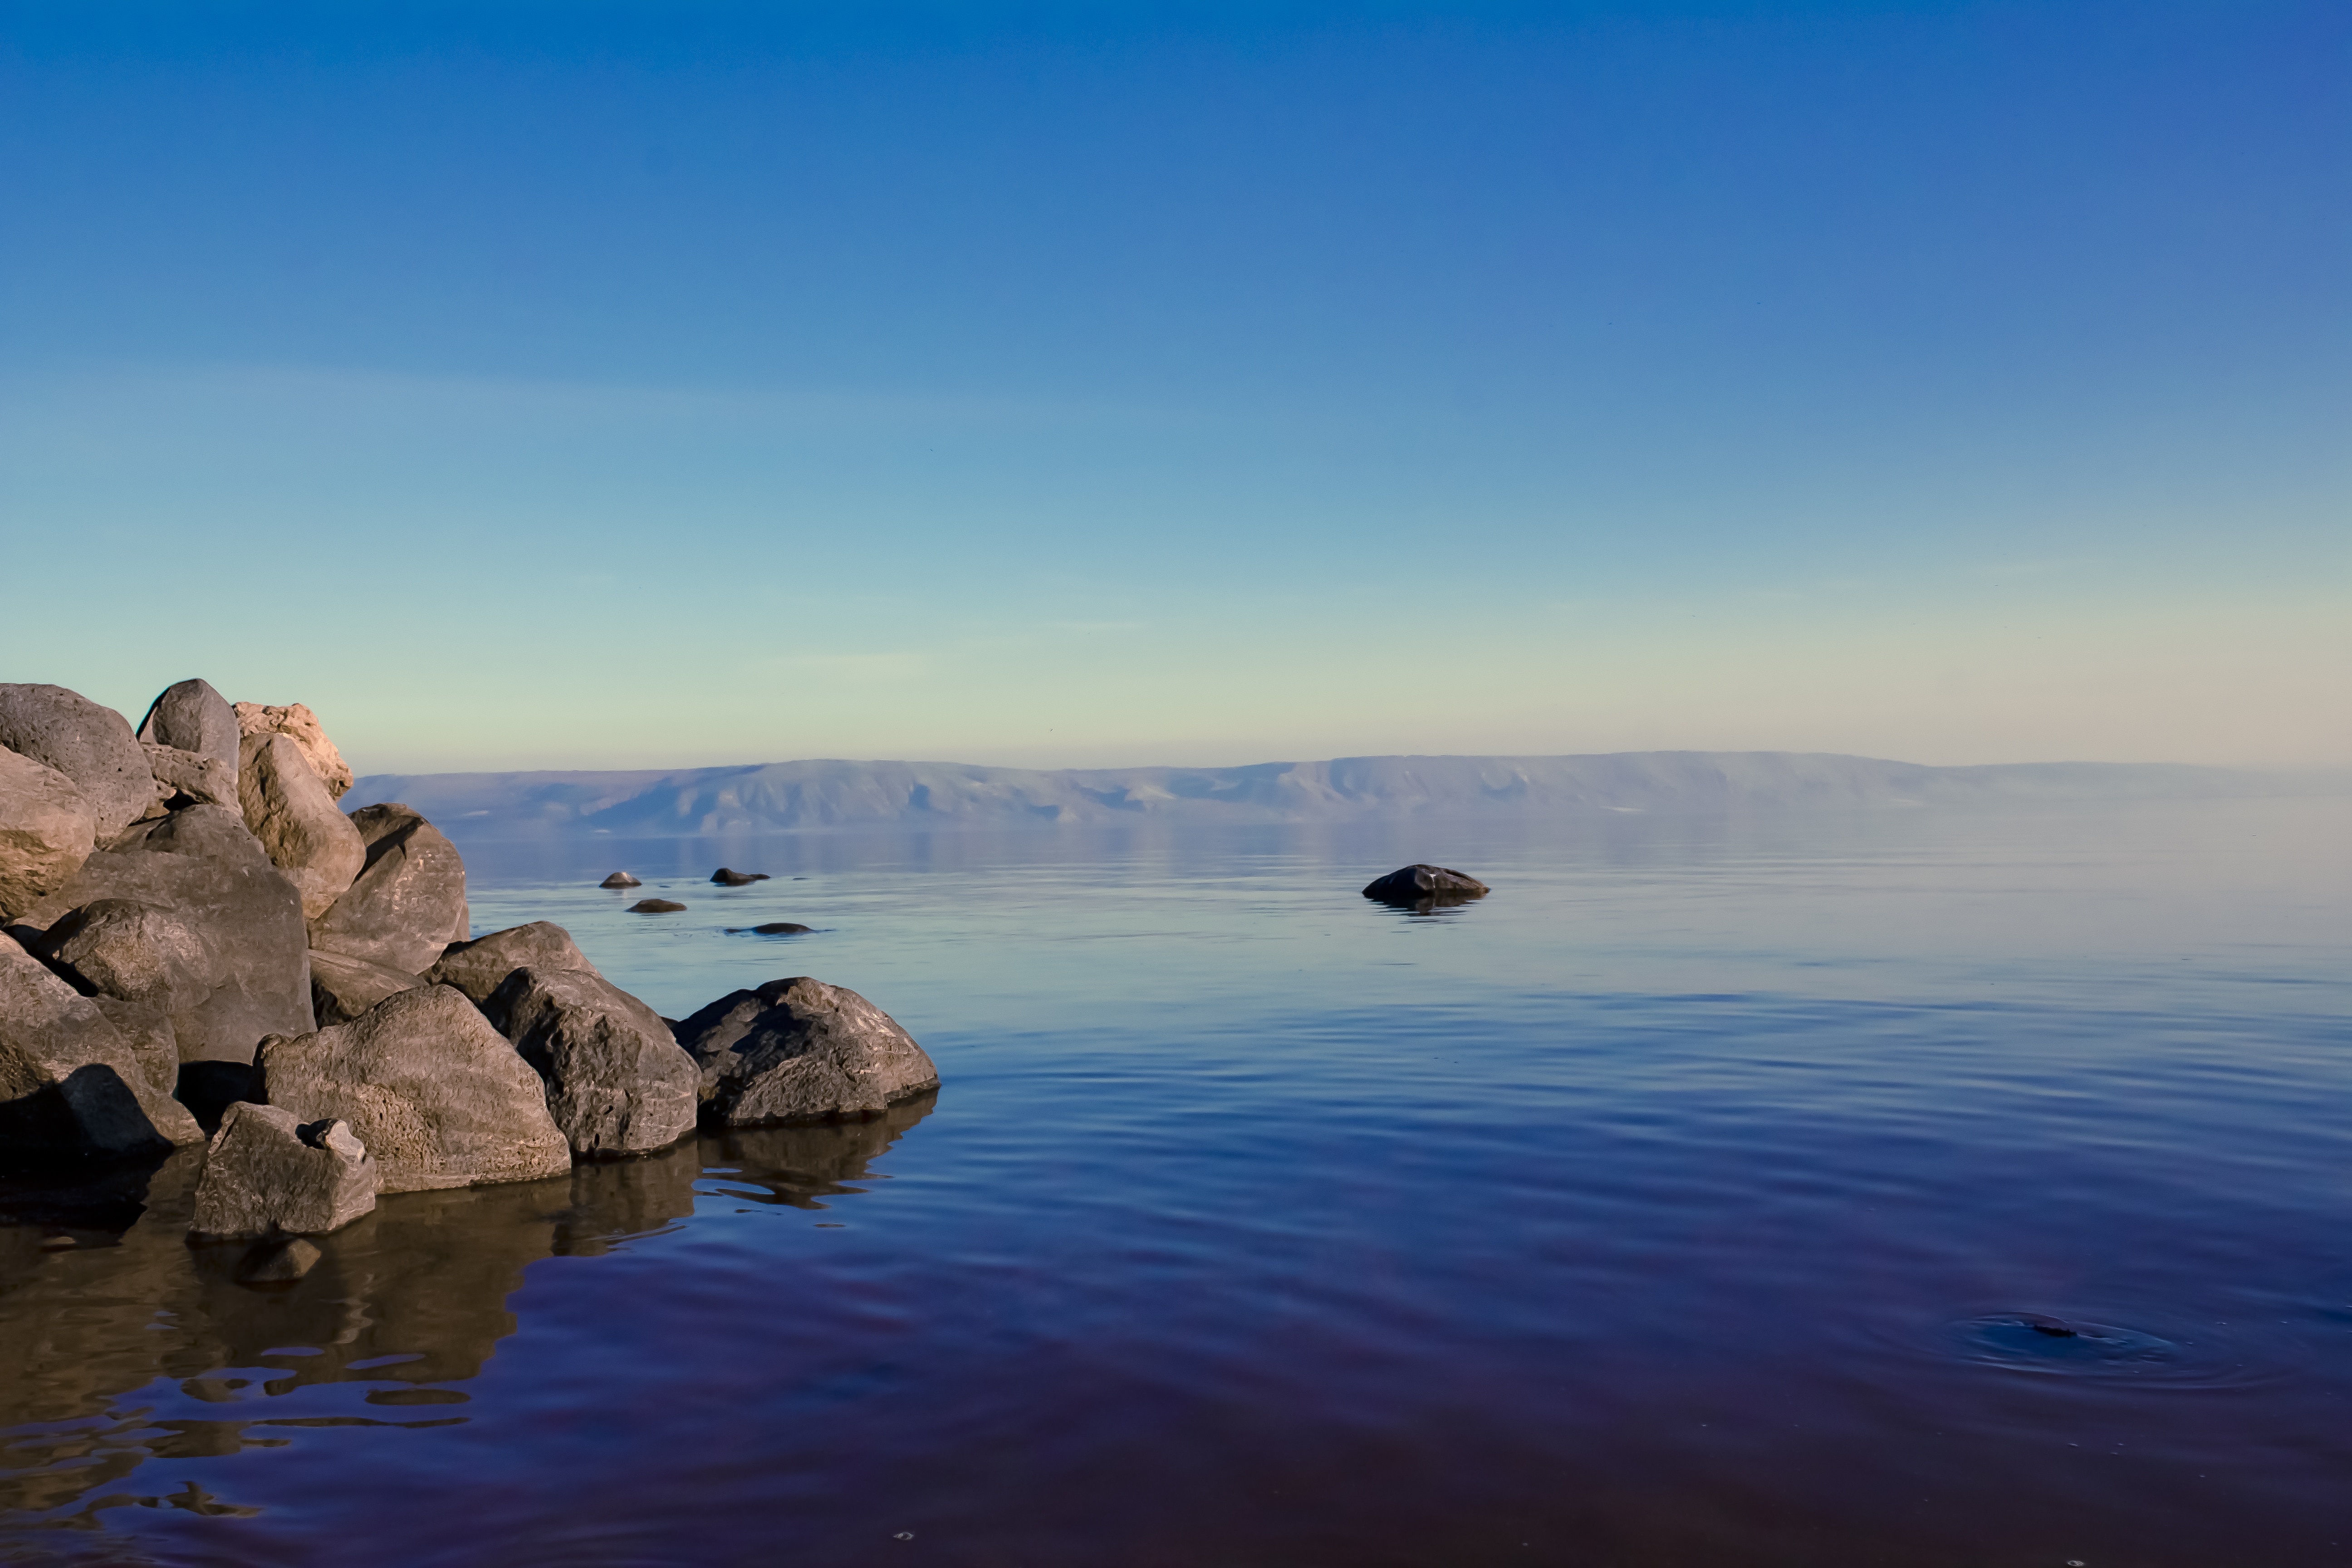 rocks on body of water under blue sky during daytime